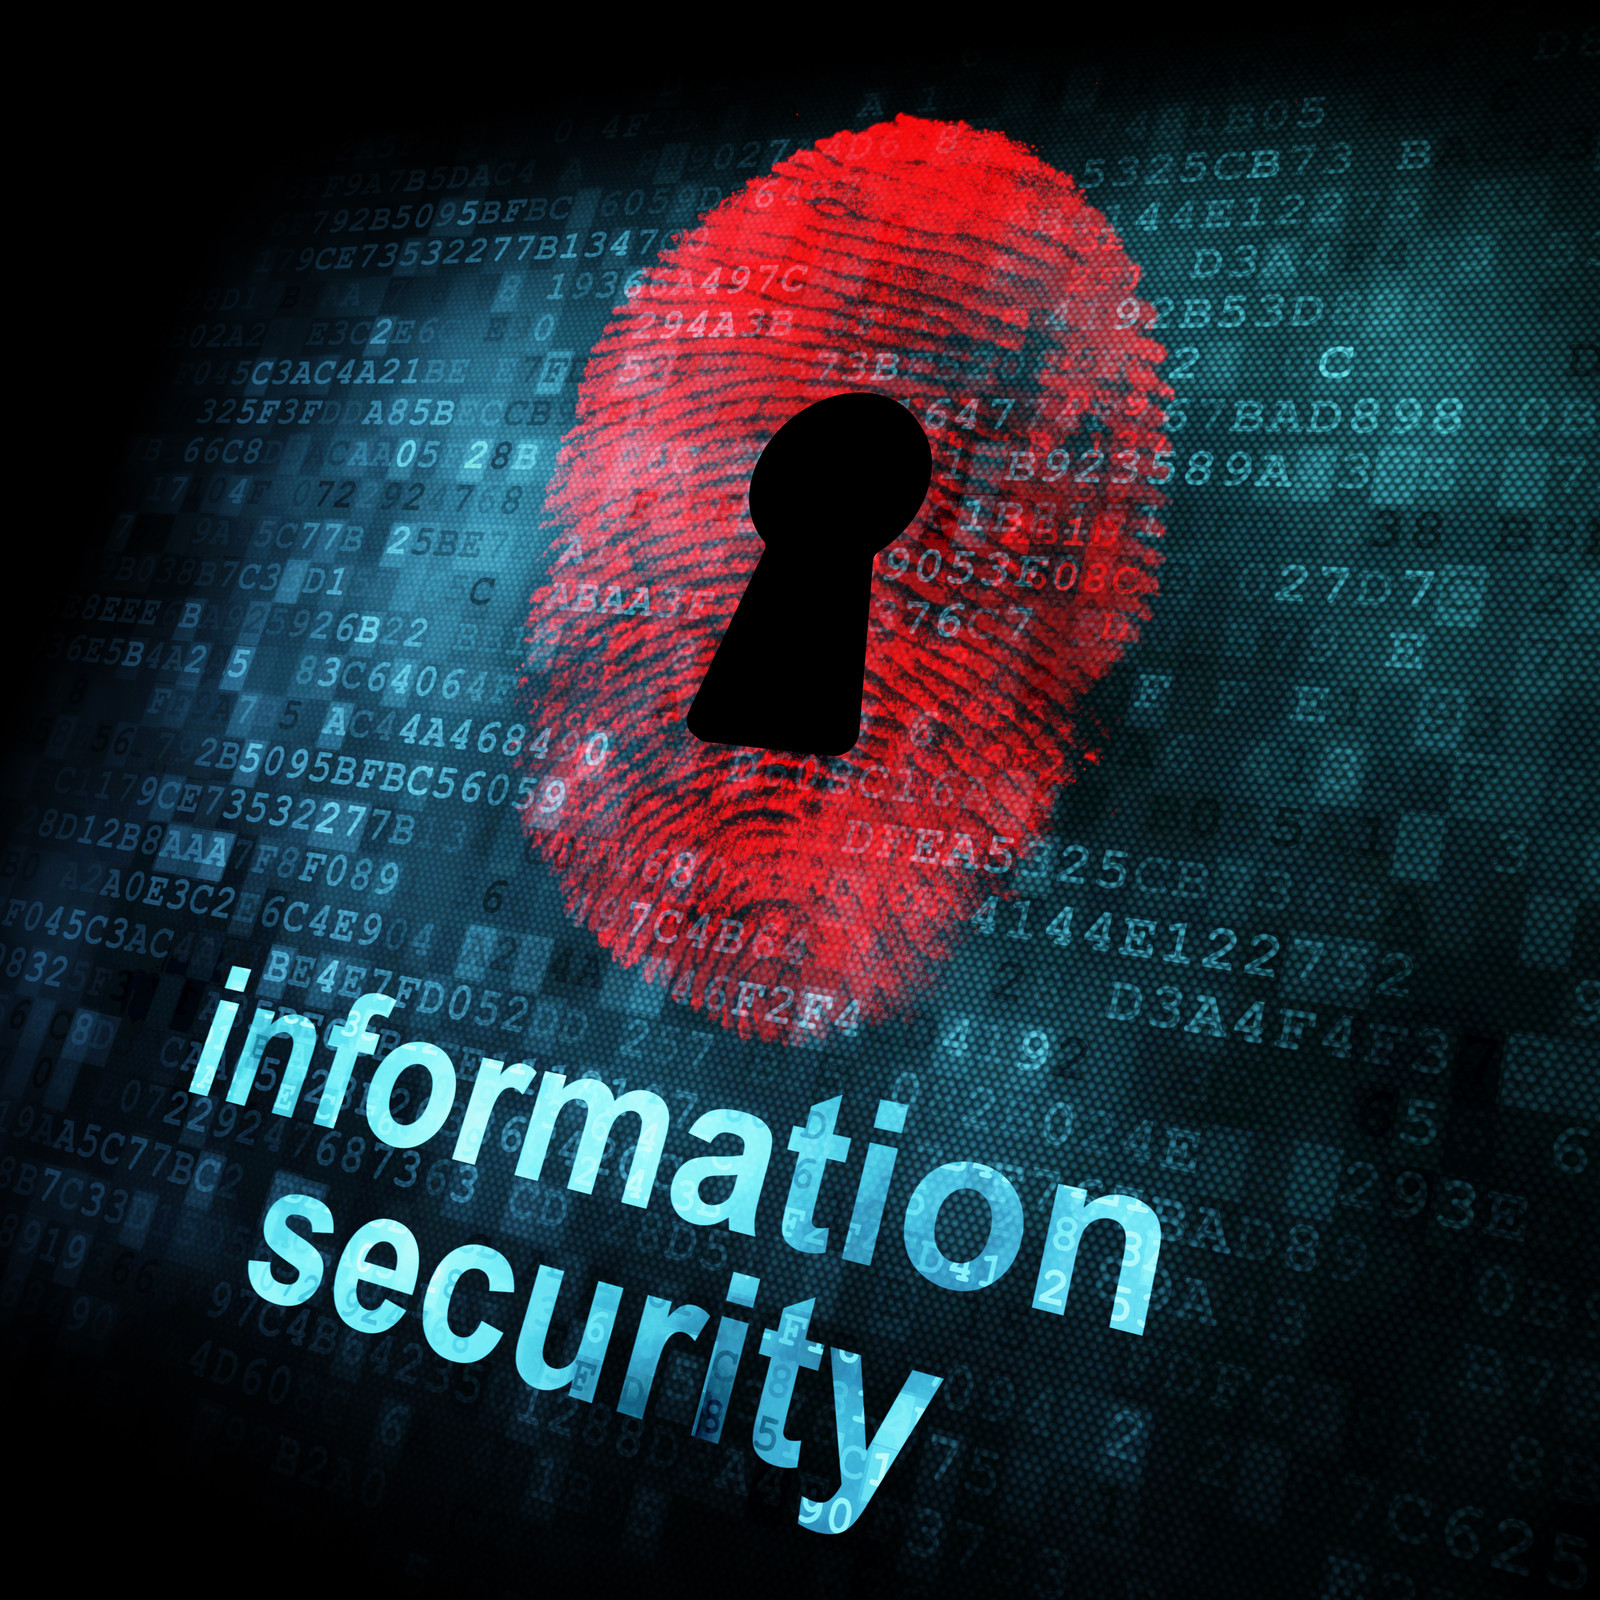 8 steps for implementing a successful print security plan